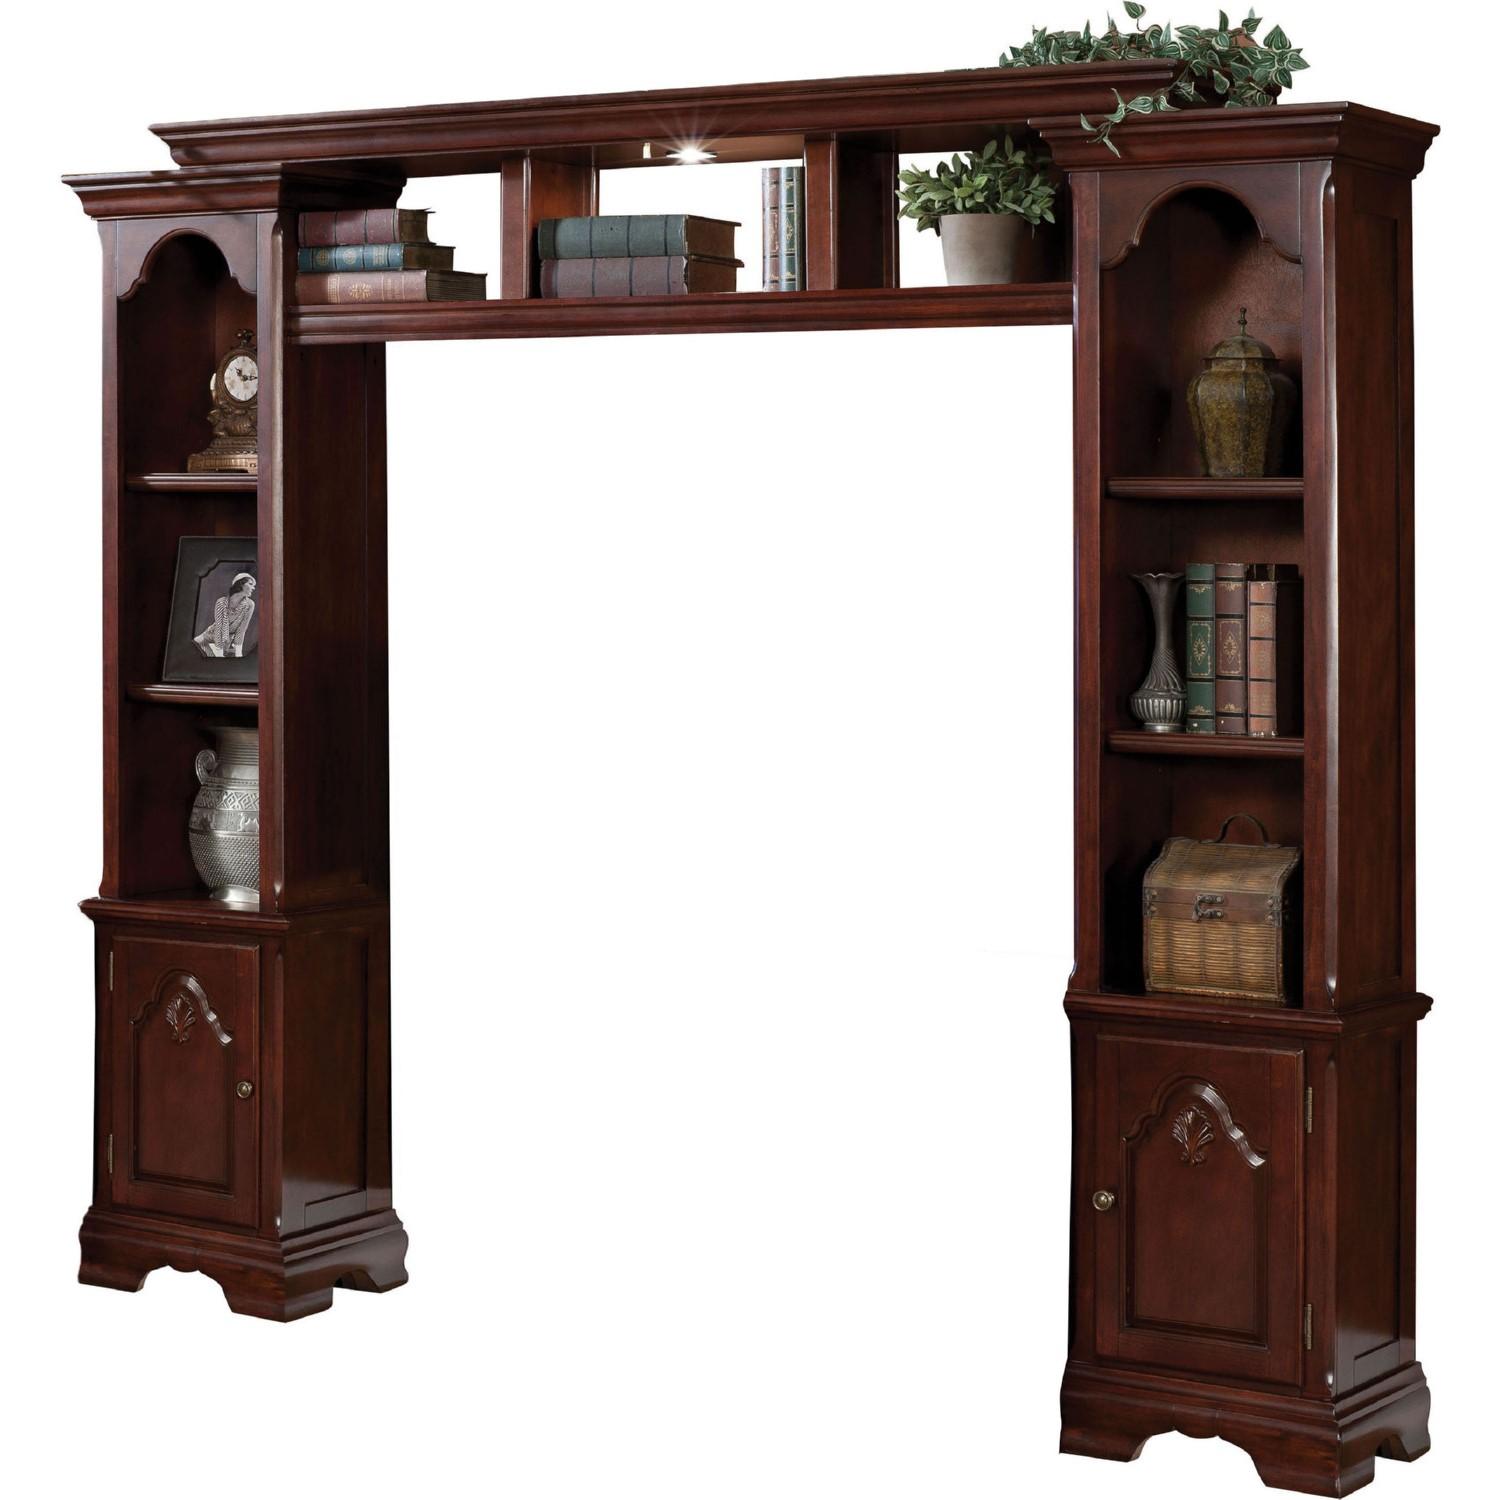 

    
Transitional Cherry Entertainment Center by Acme Hercules 91110_KIT
